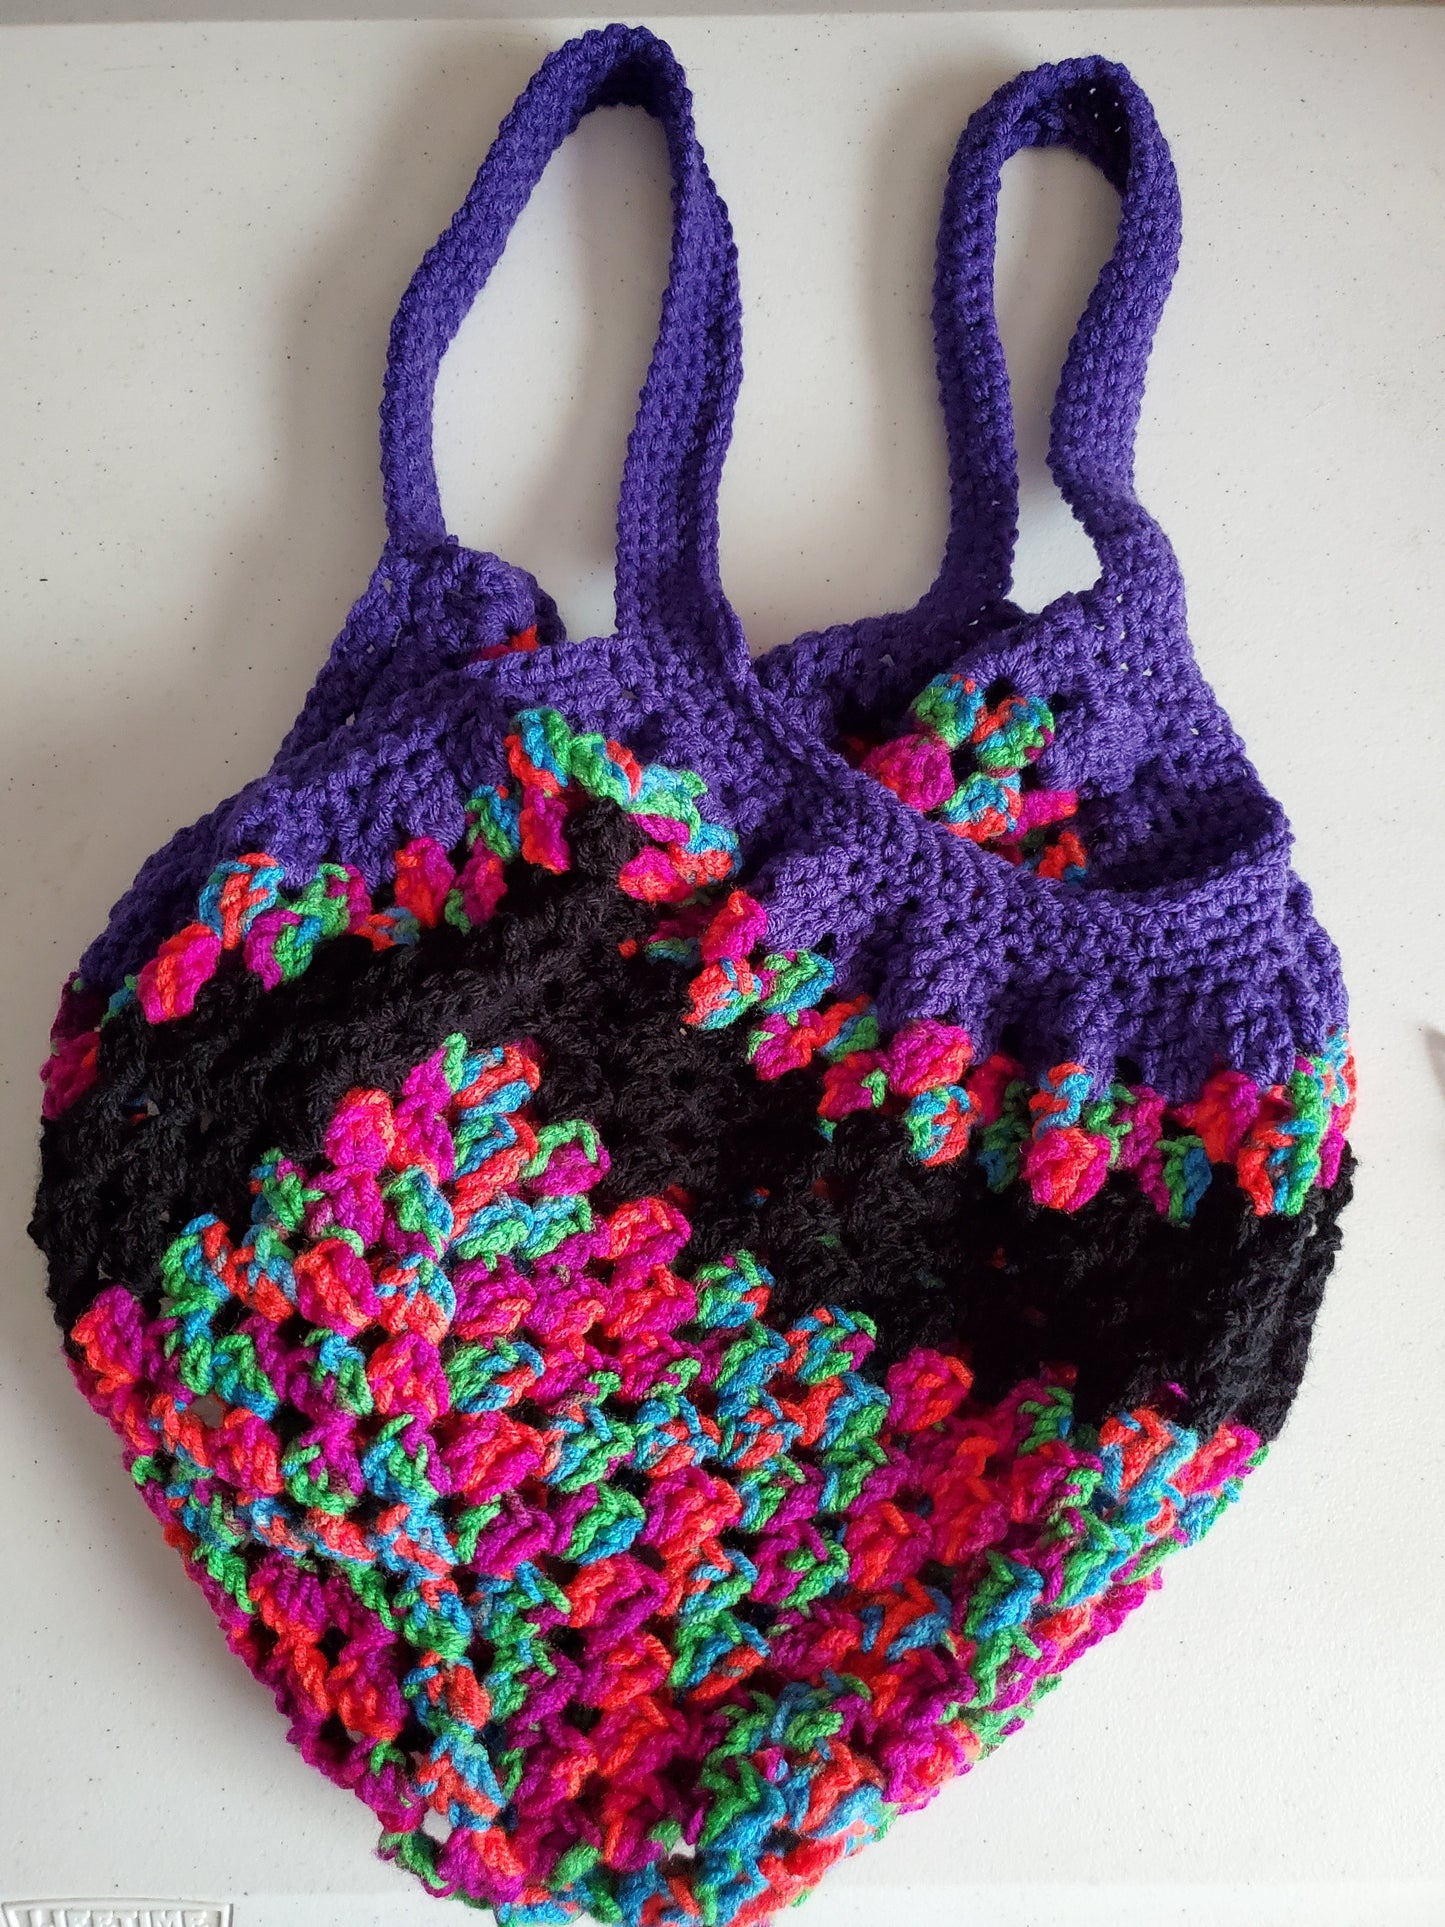 Market Bag / Crocheted Bag / Neon with Black and Purple